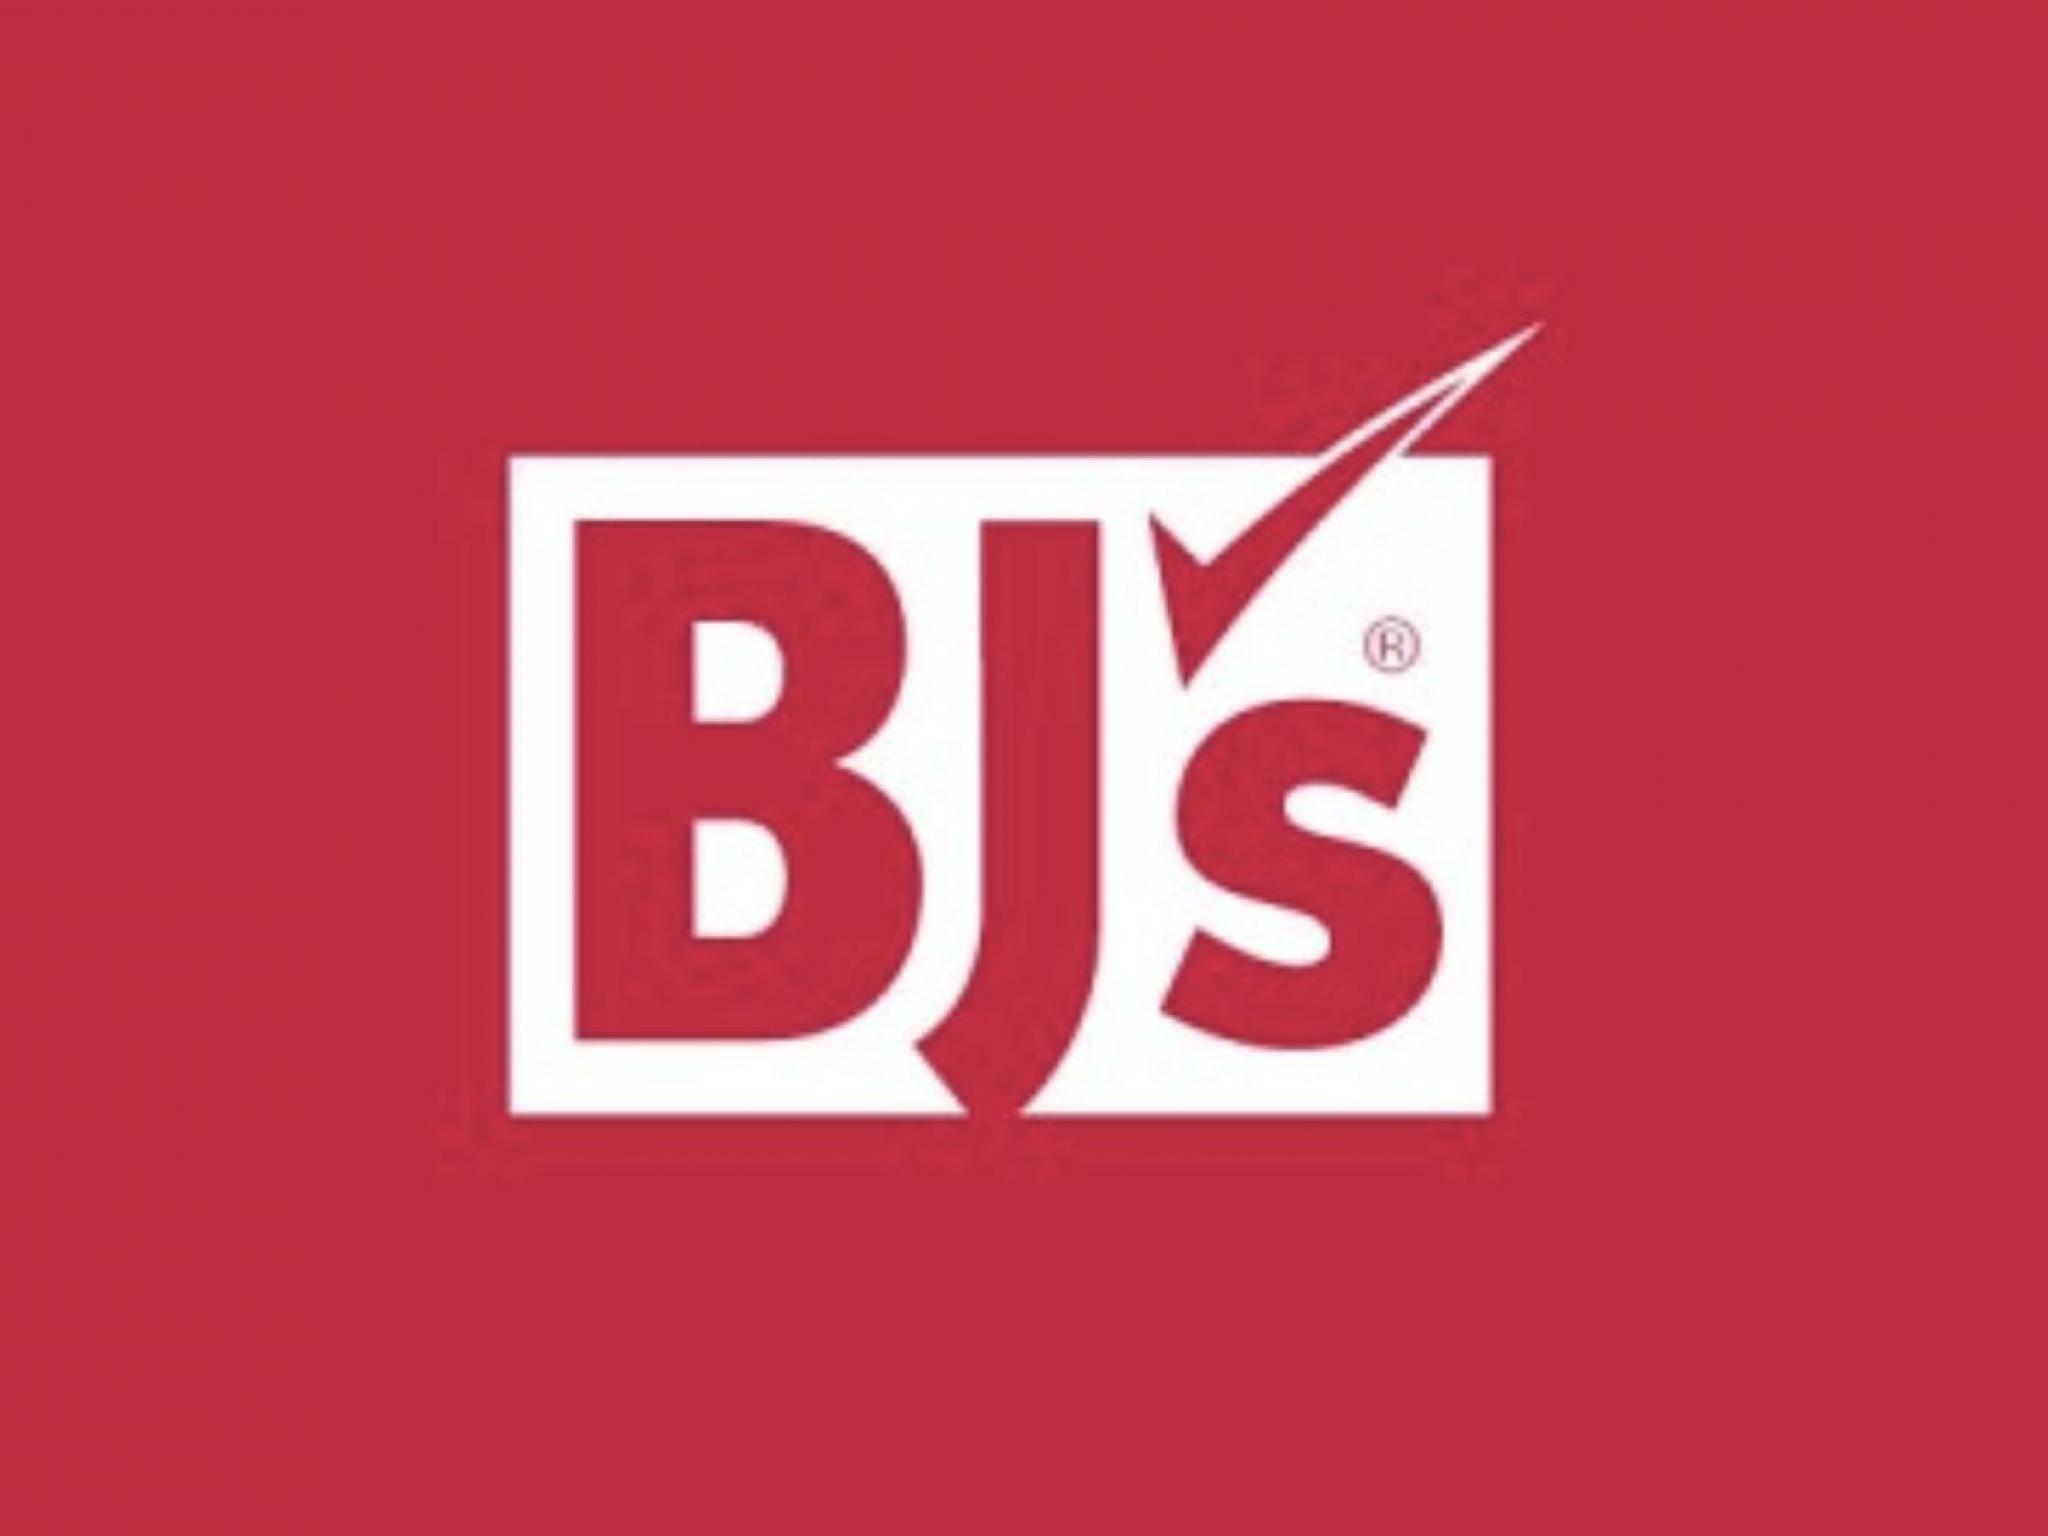  bjs-wholesale-kingsoft-cloud-zoom-video-and-other-big-stocks-moving-lower-on-tuesday 